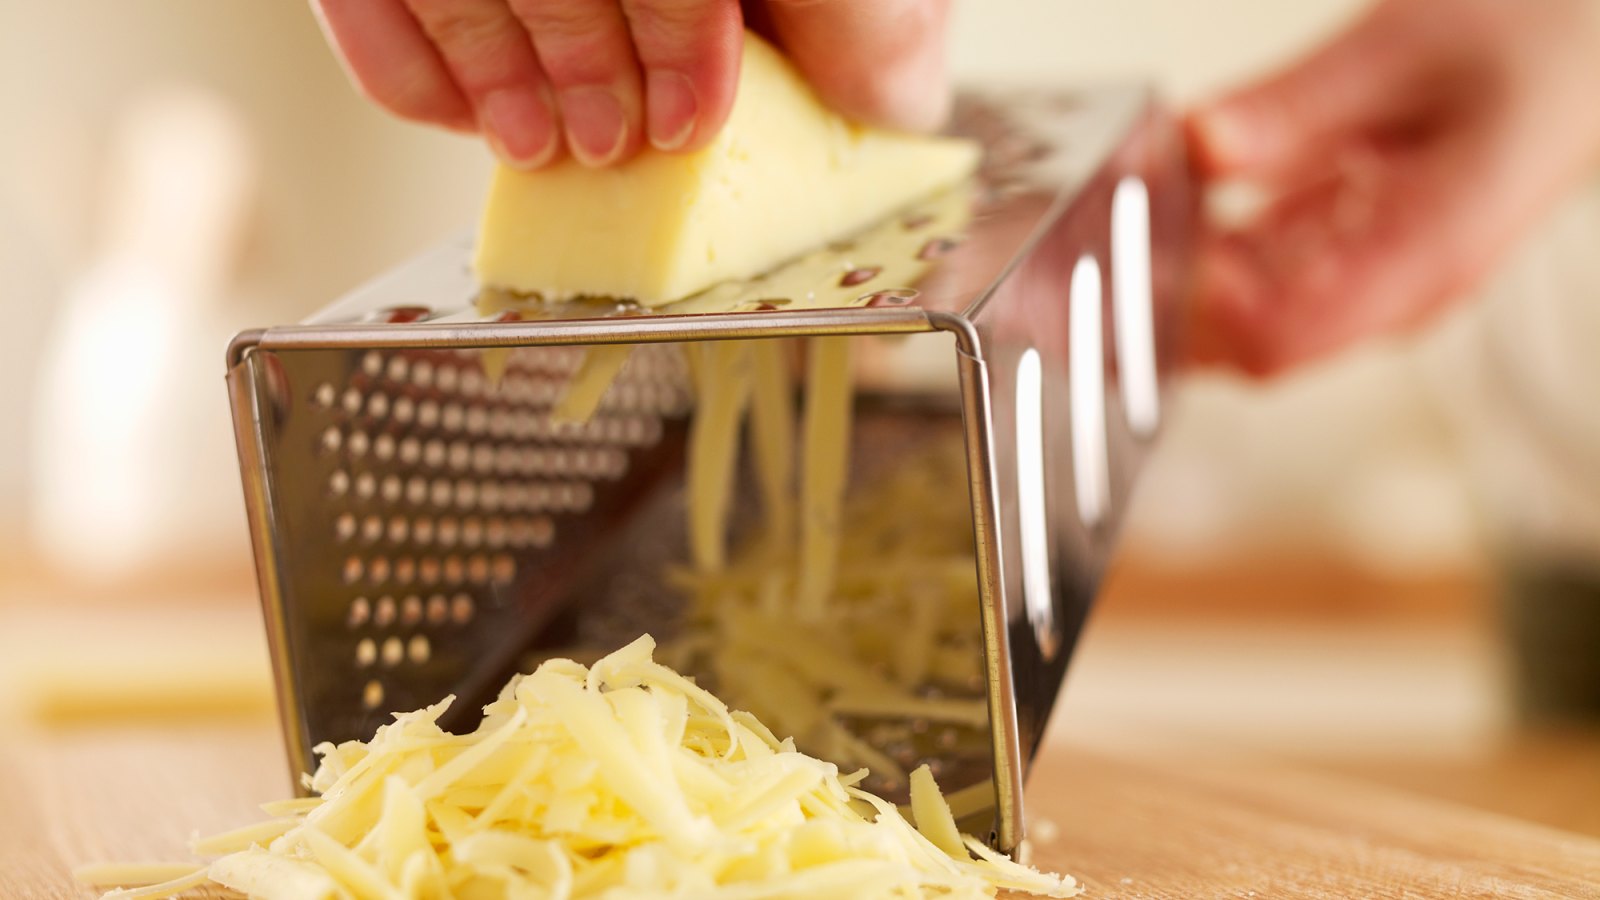 Woman shredded cheese with grater